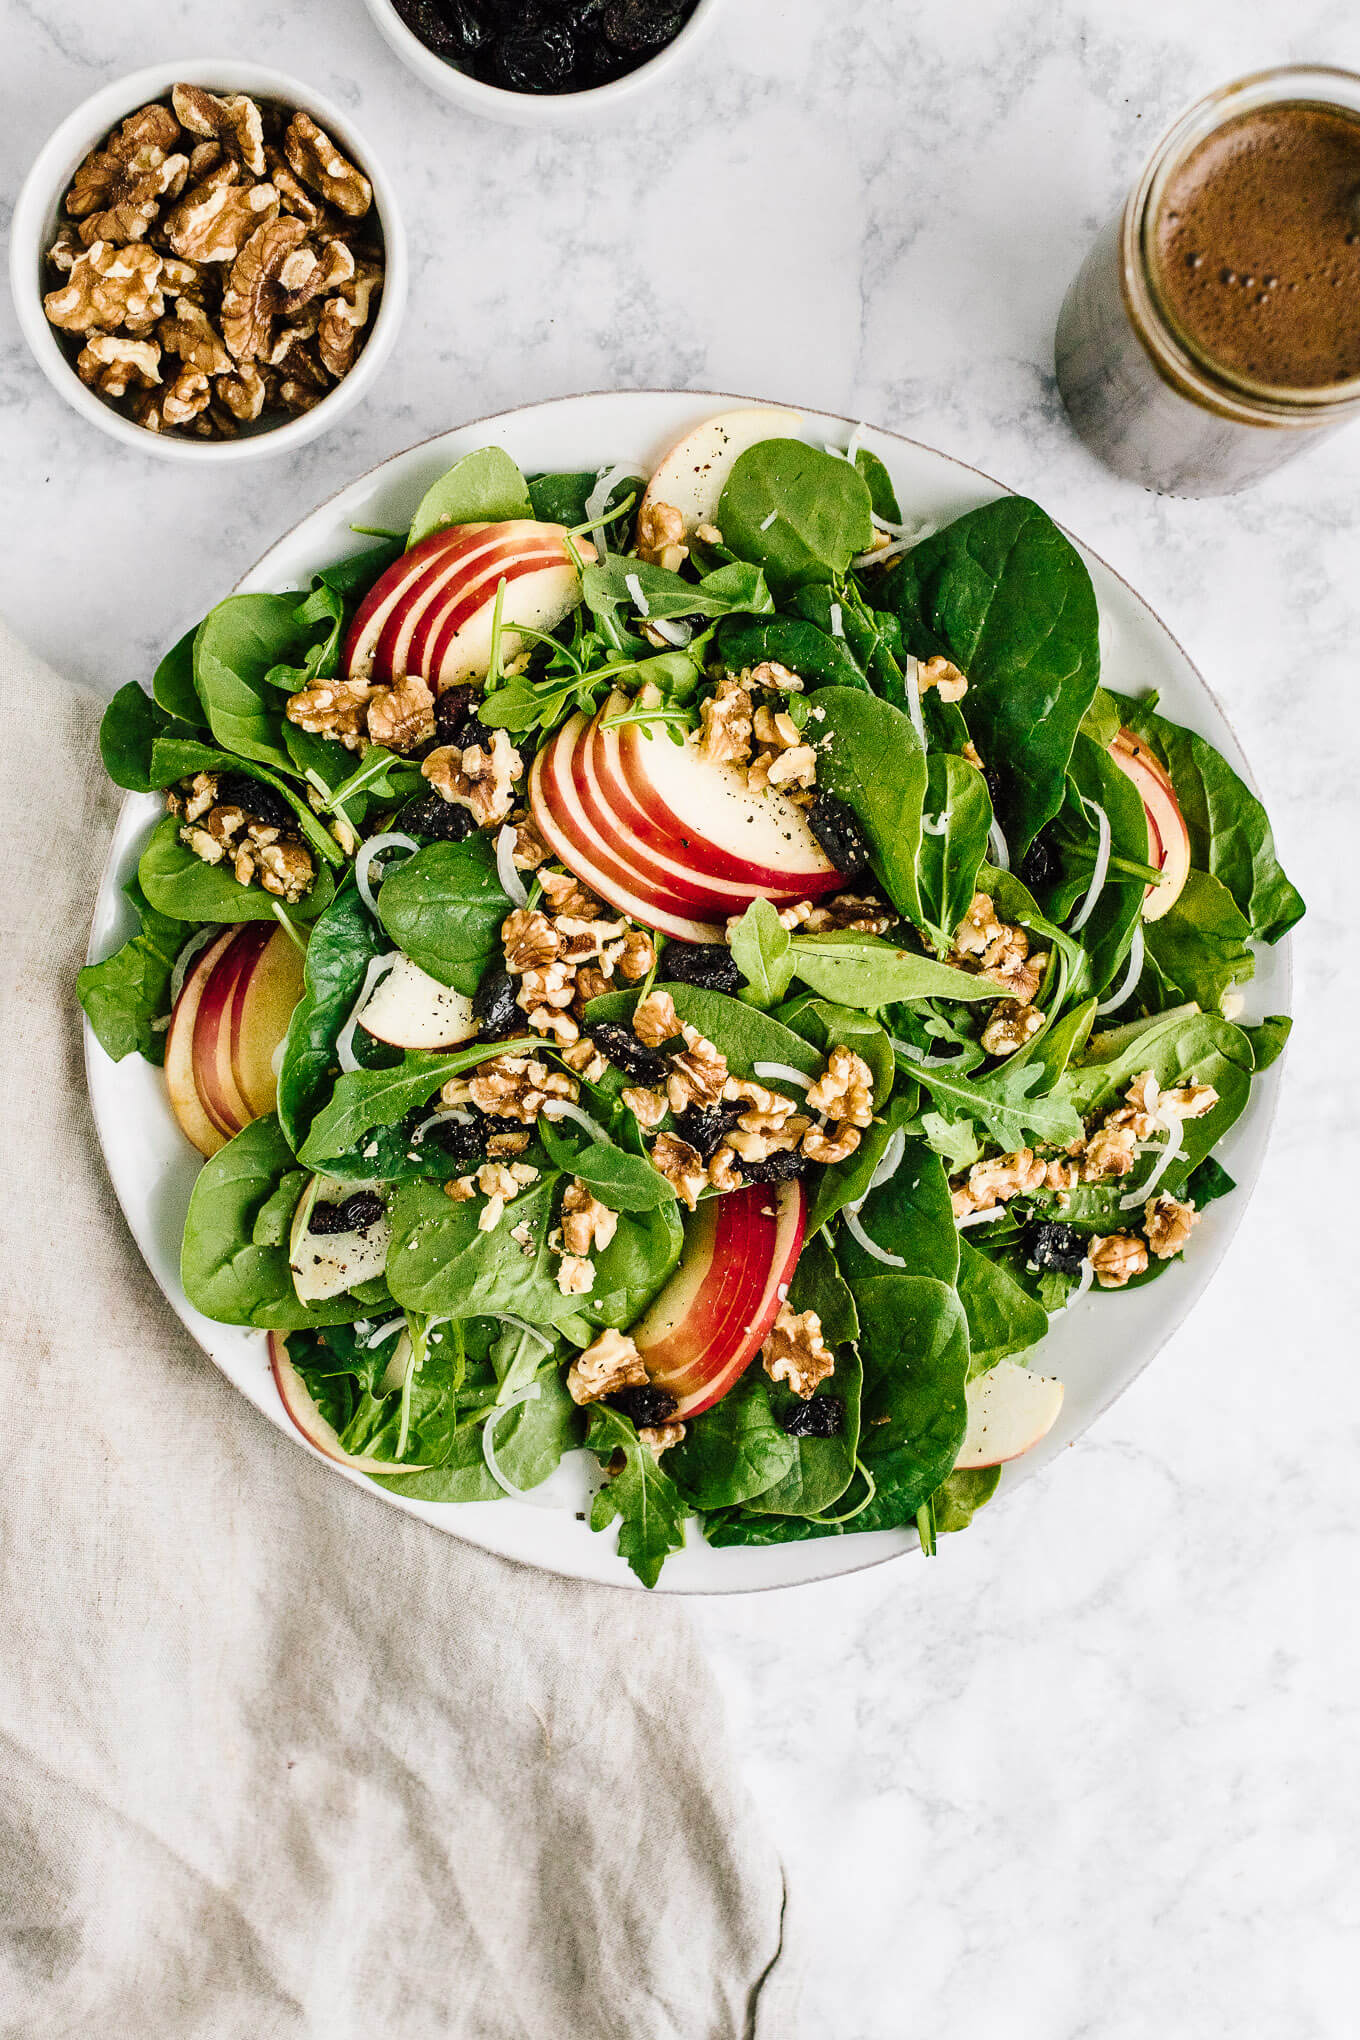 Apple Walnut Spinach Salad with Balsamic Vinaigrette in serving bowl